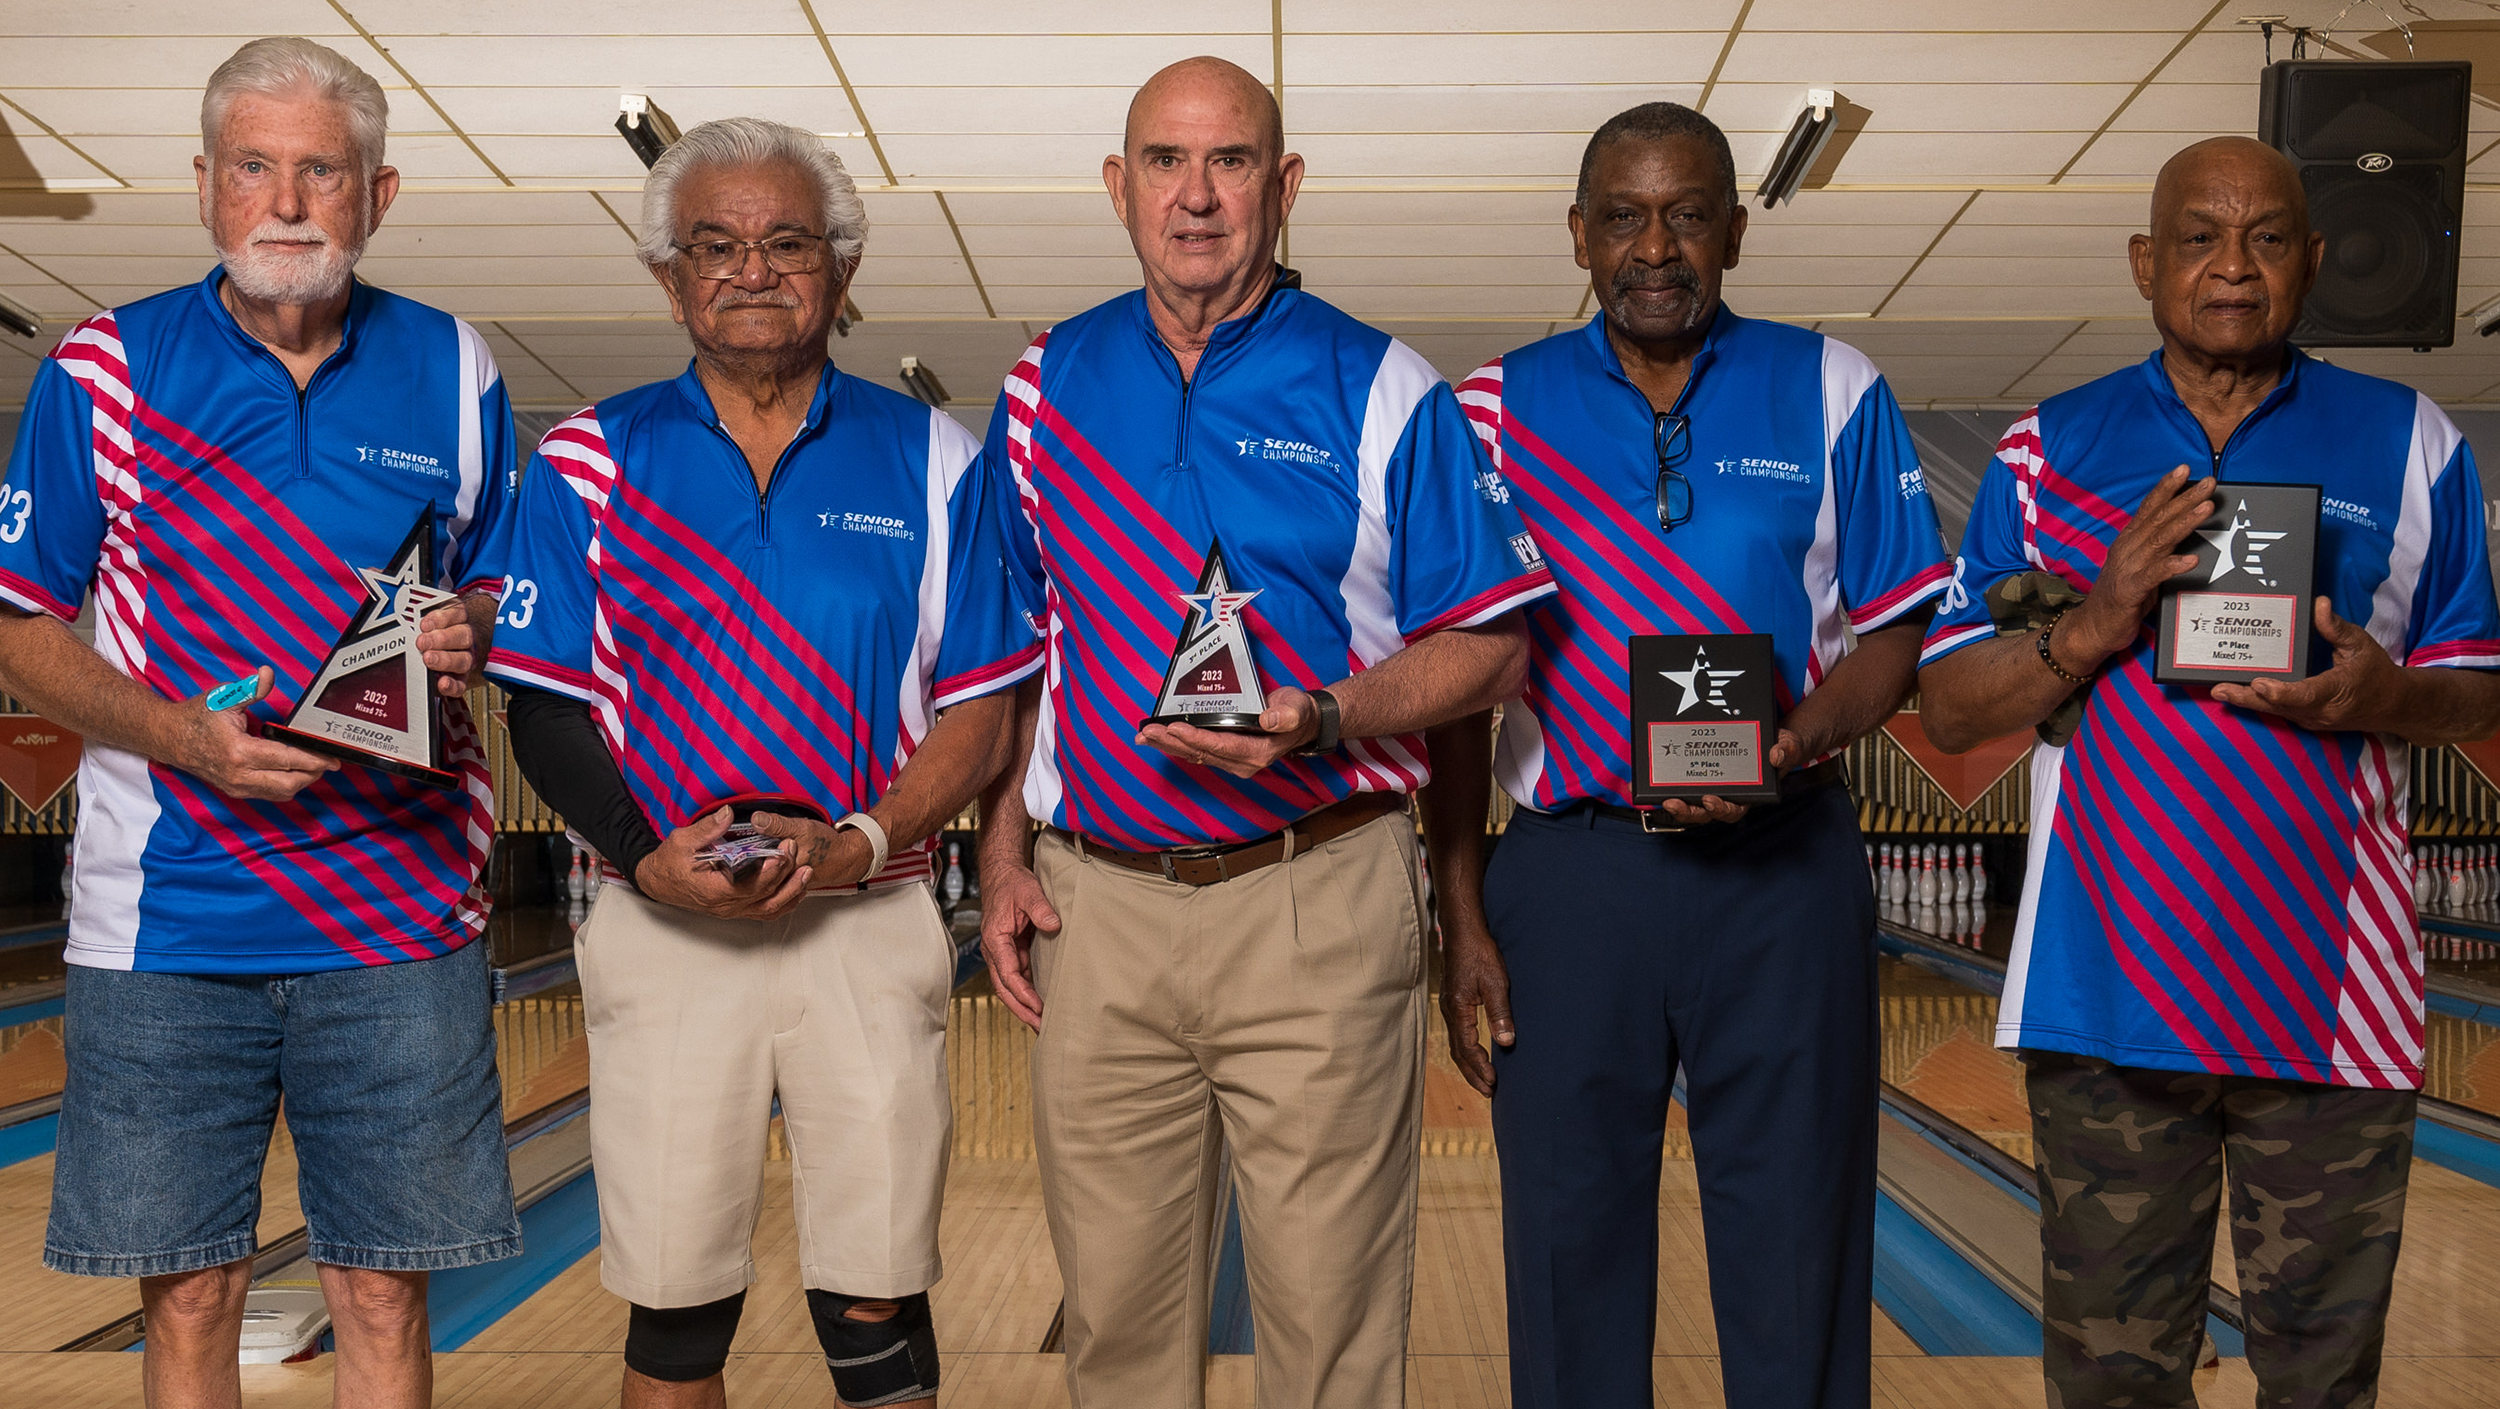 The top six finishers in Mixed 75 and older at the 2023 USBC Senior Championships.